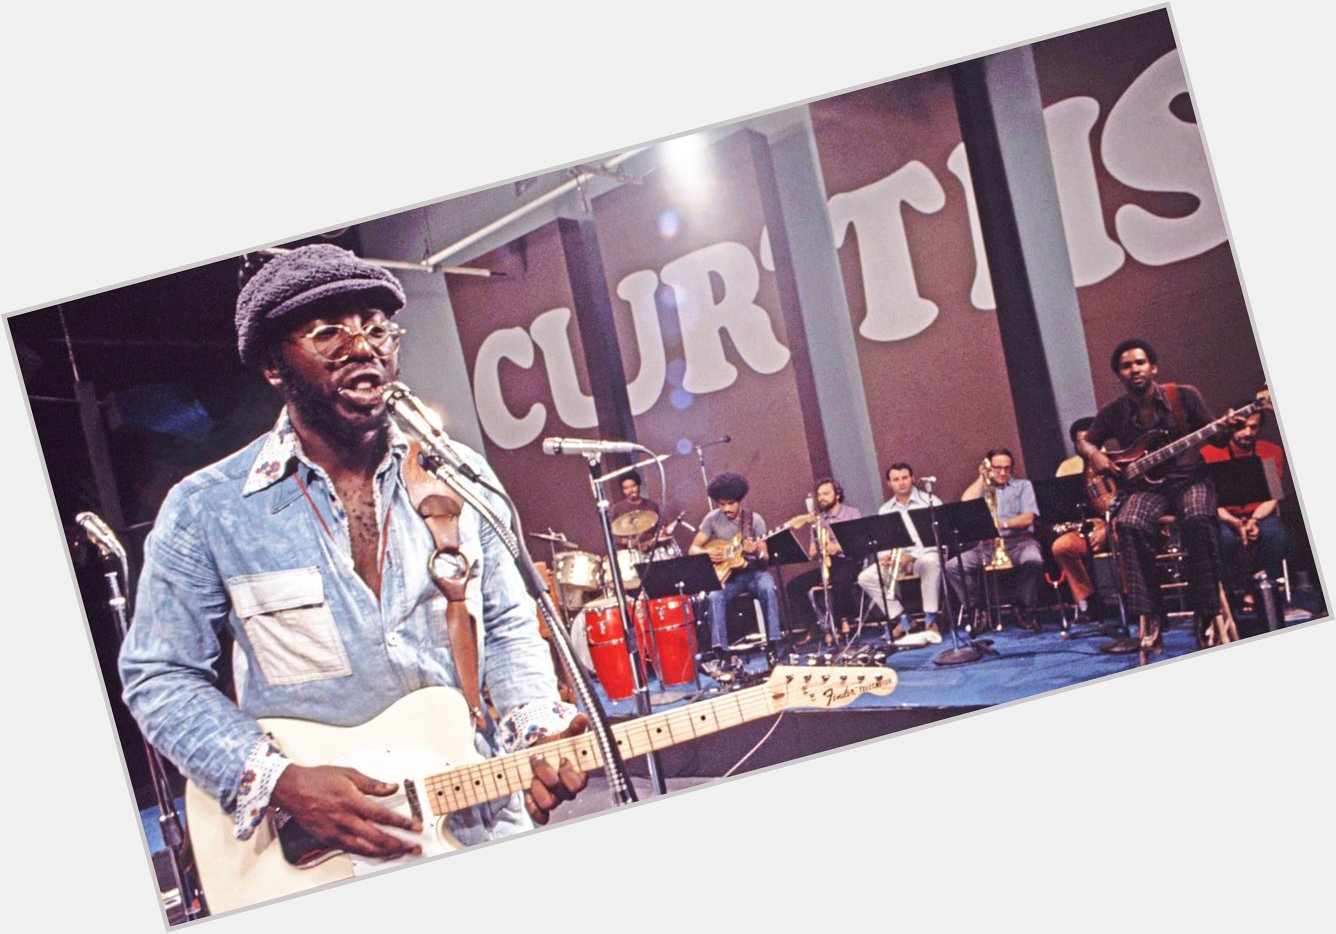 Happy Birthday to Curtis Mayfield who would have turned 75 today! 